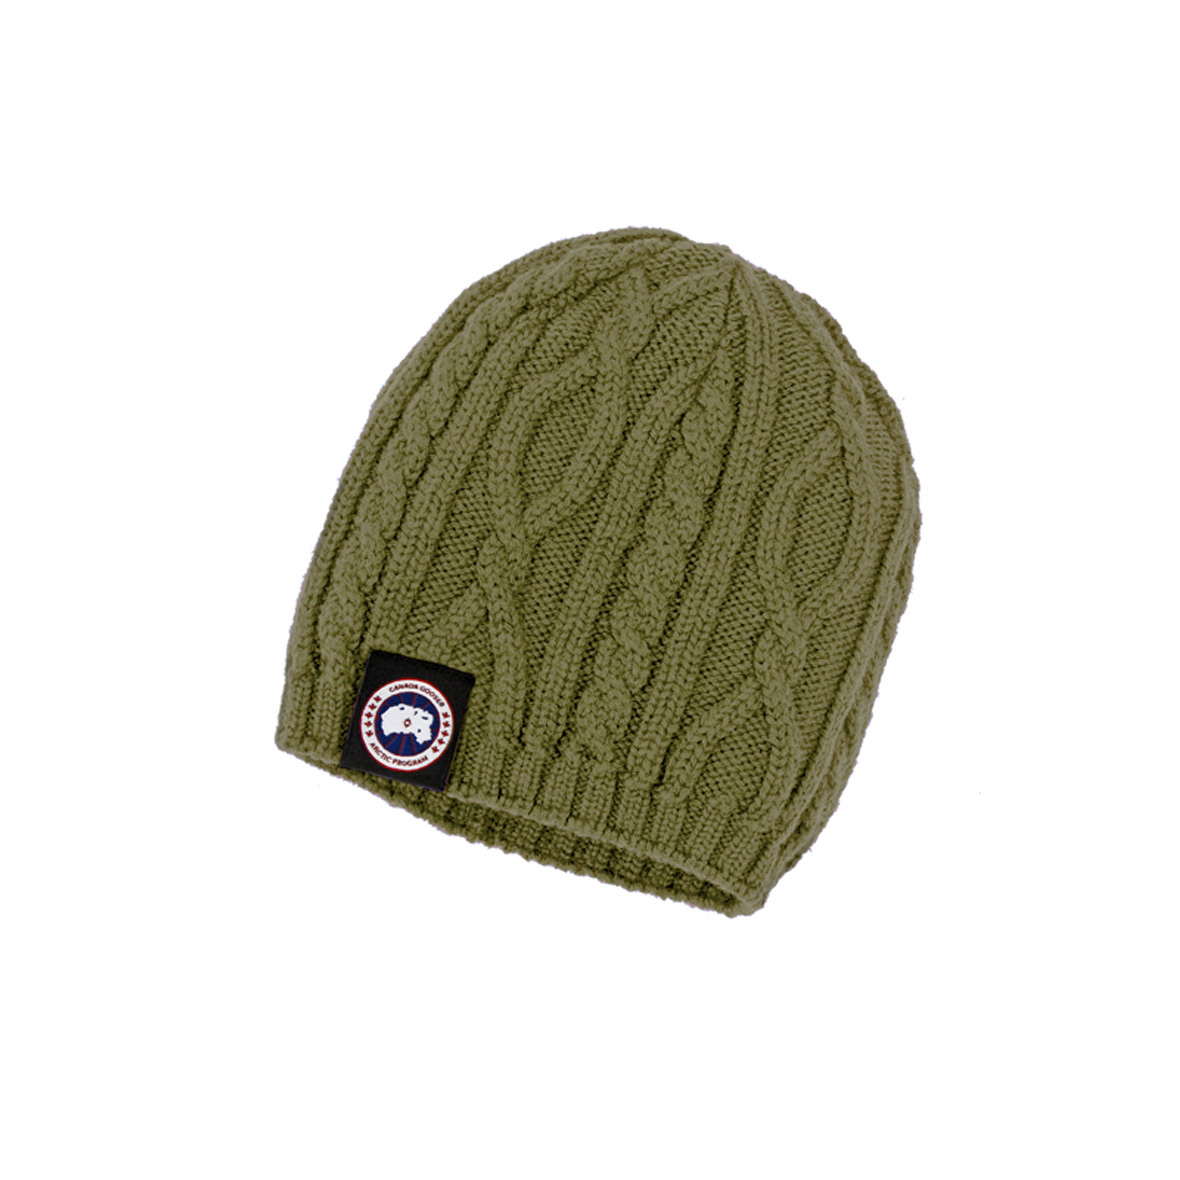 Canada Goose Unisex Merino Cable-Knit Beanie MILITARY GREEN